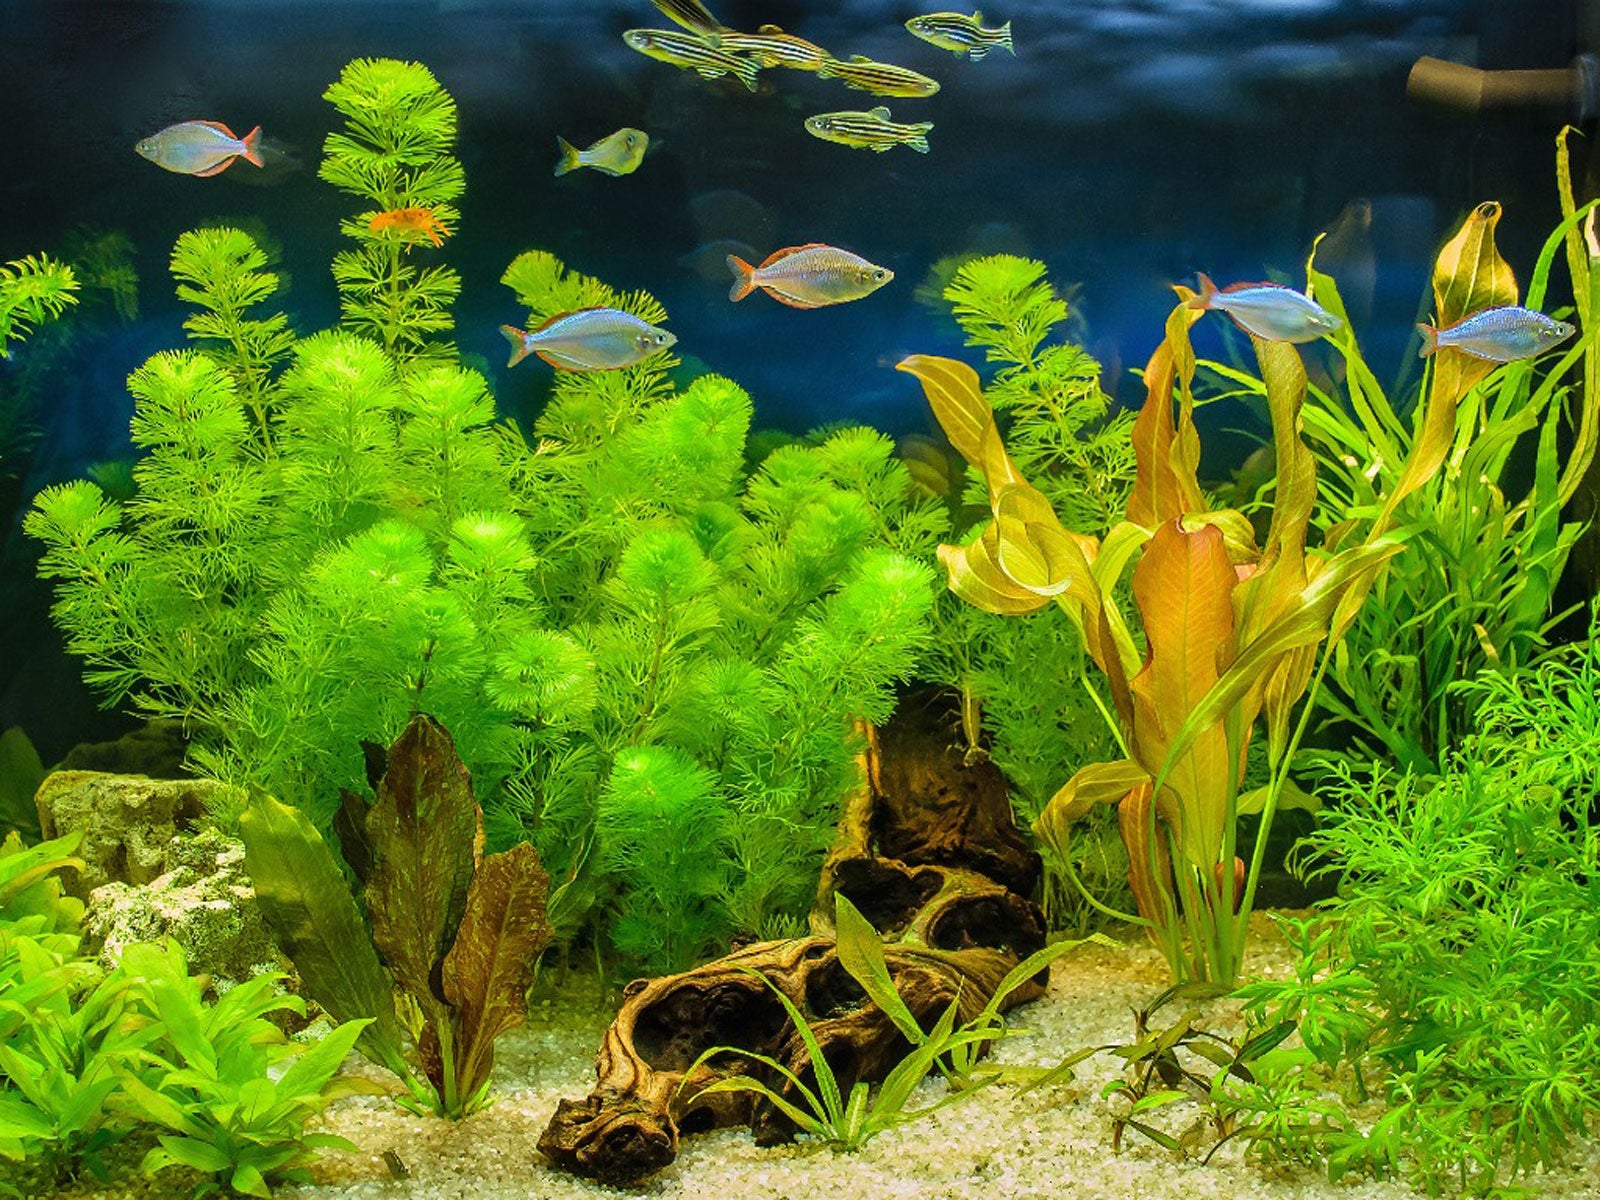 Taking care of freshwater plants